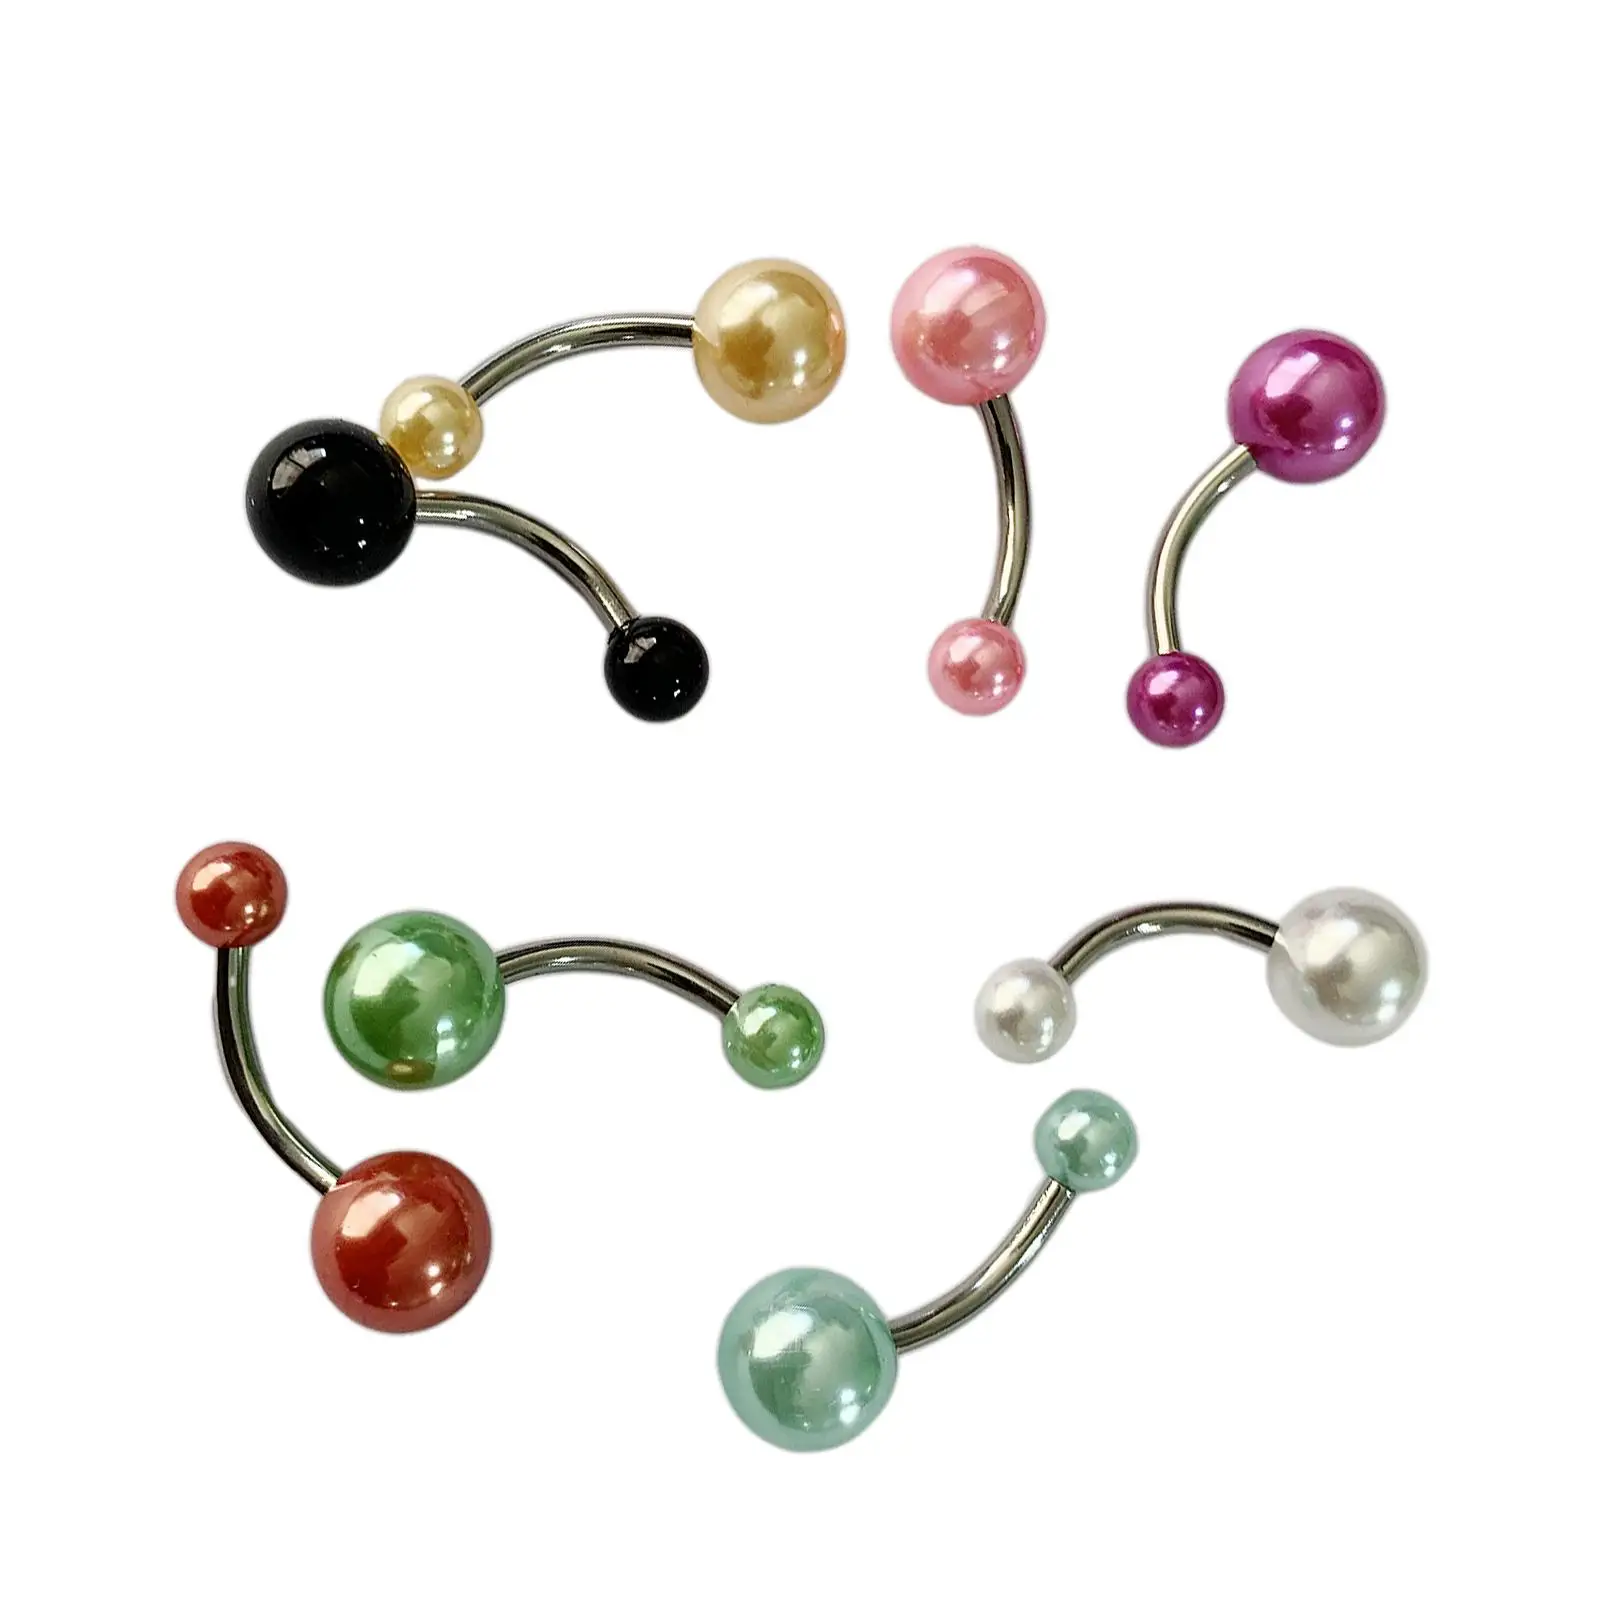 8 Pieces Assorted Colors Belly Button Rings 1.6mm Accessory Easy to Wear Acrylic Mix Color Body Piercing Jewelry for Women Men